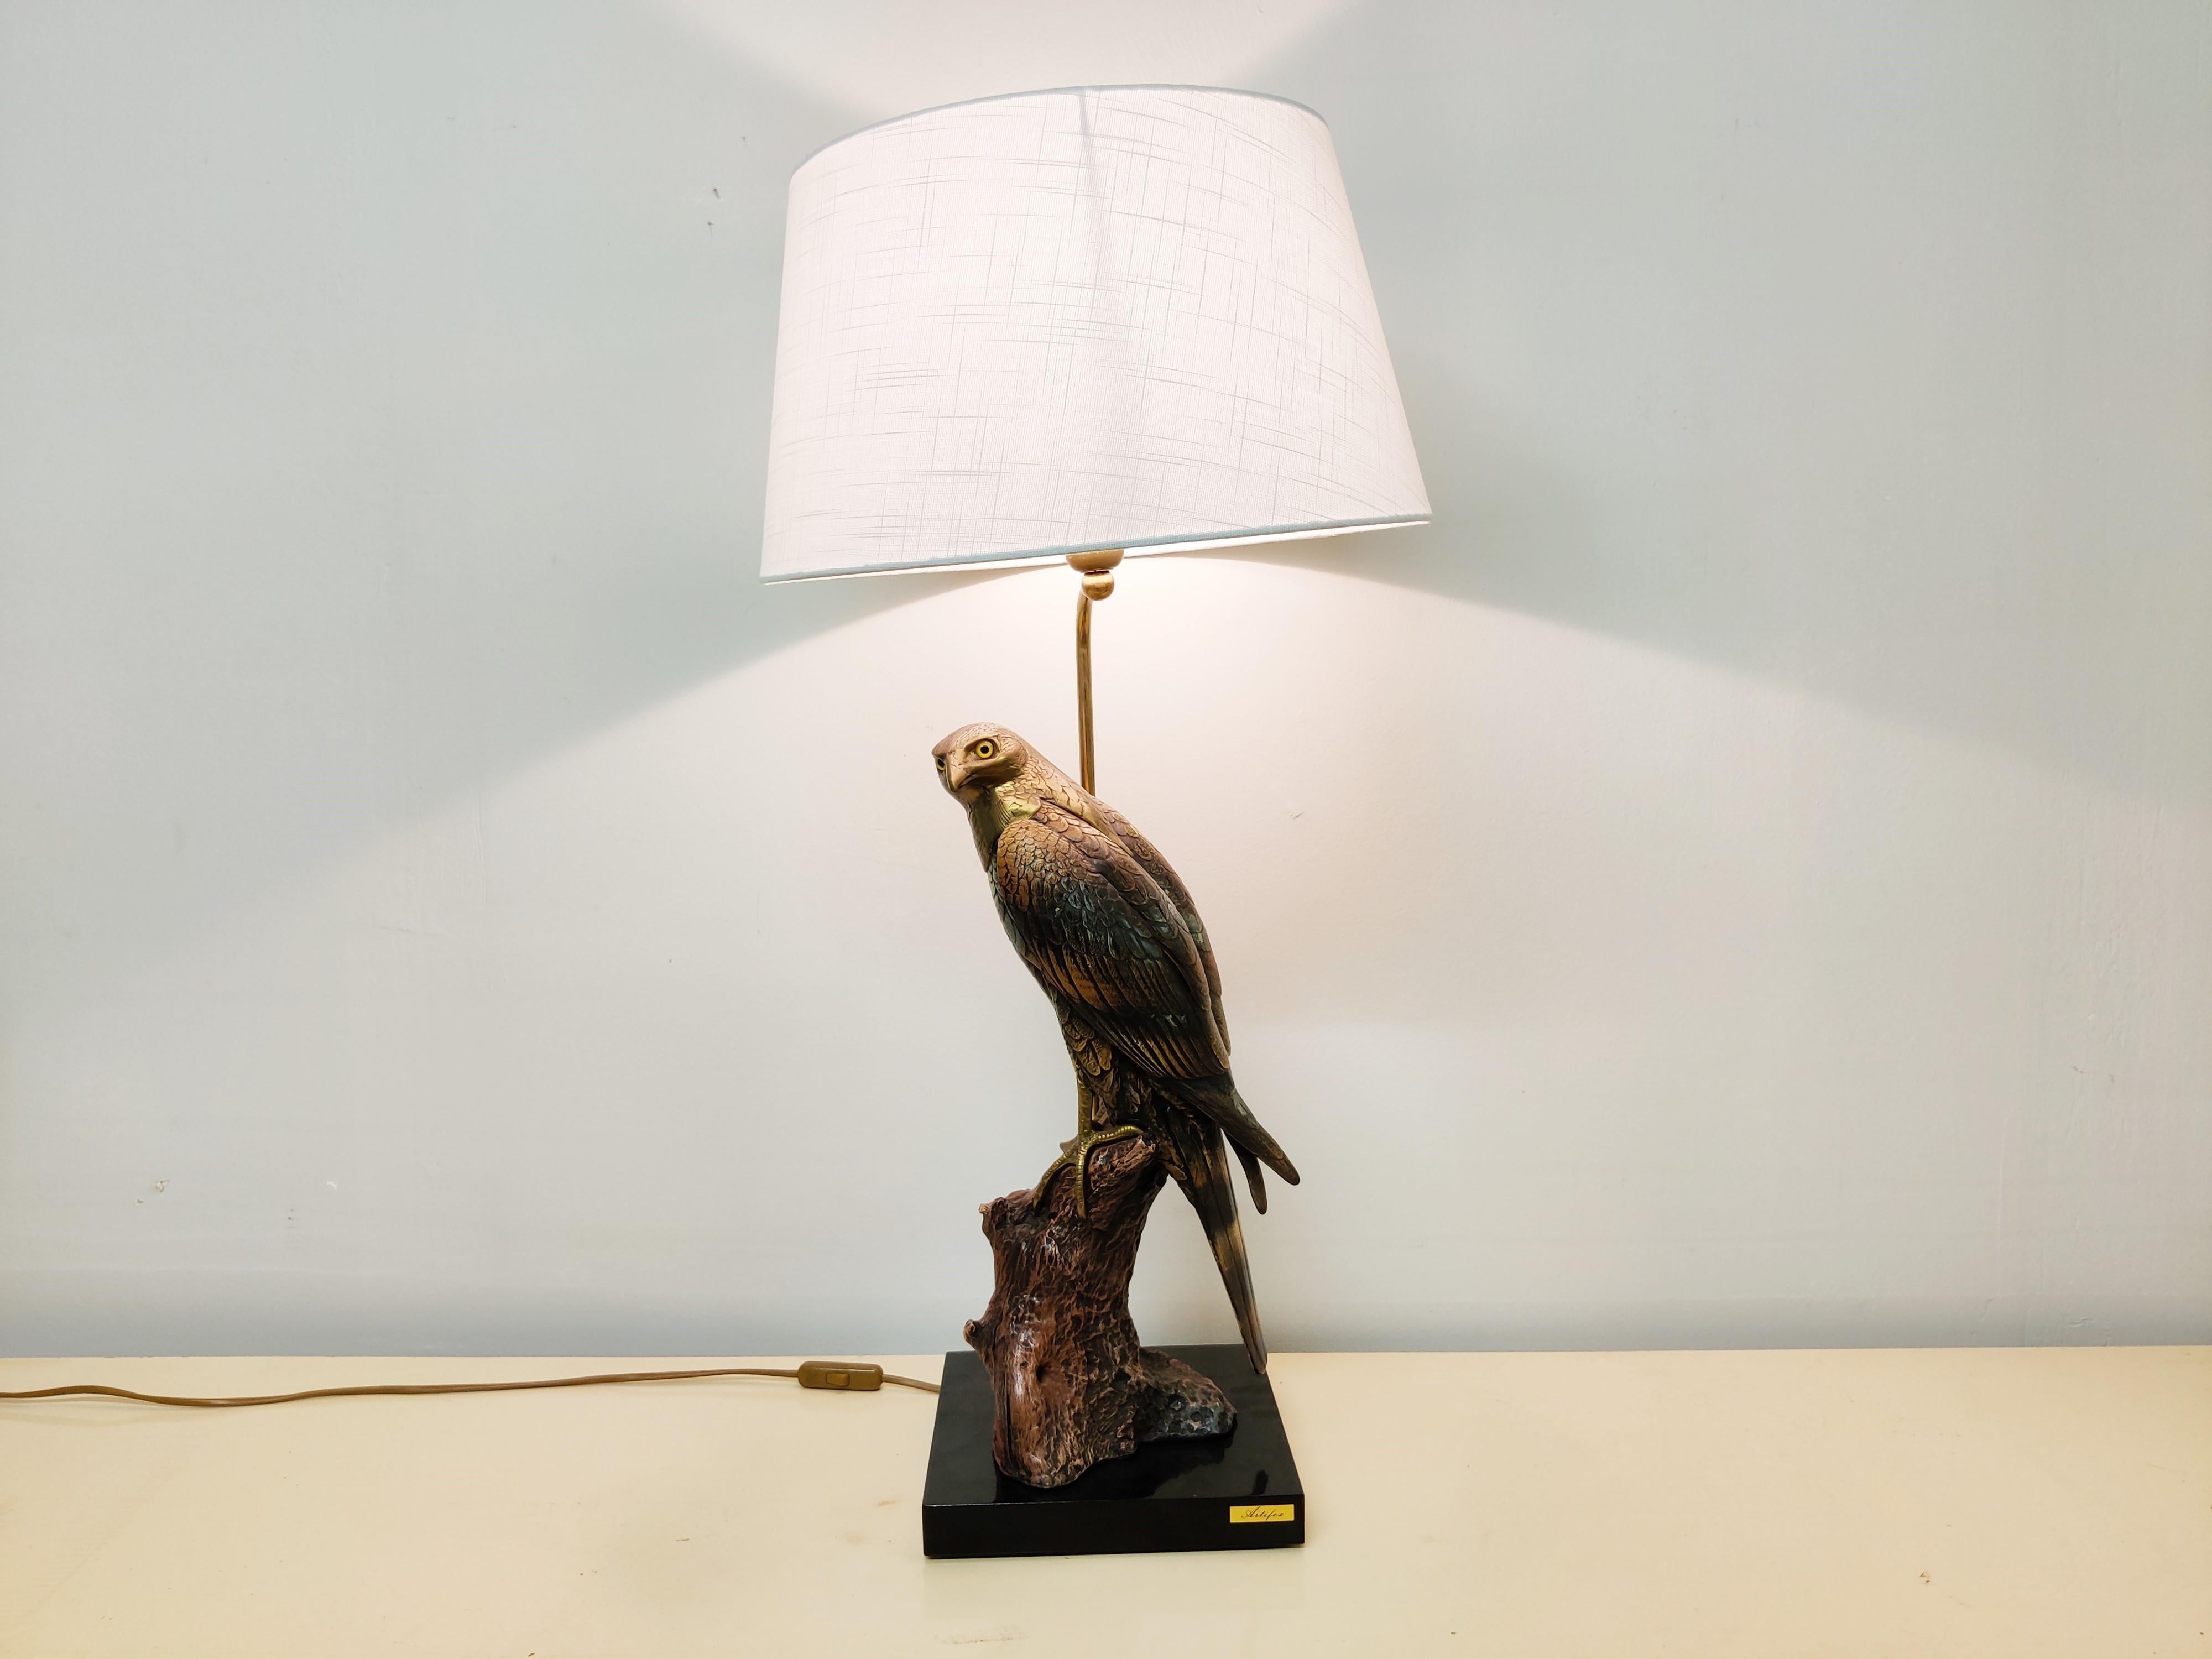 Higly detailed sculptural eagle table lamp signed by Elli Malevolti for Artiflex.

Beautiful handmade resin eagle sculpture with beautiful brass legs and head. 

1970s - Italy

Very good condition.

The lamp is tested and takes a regular